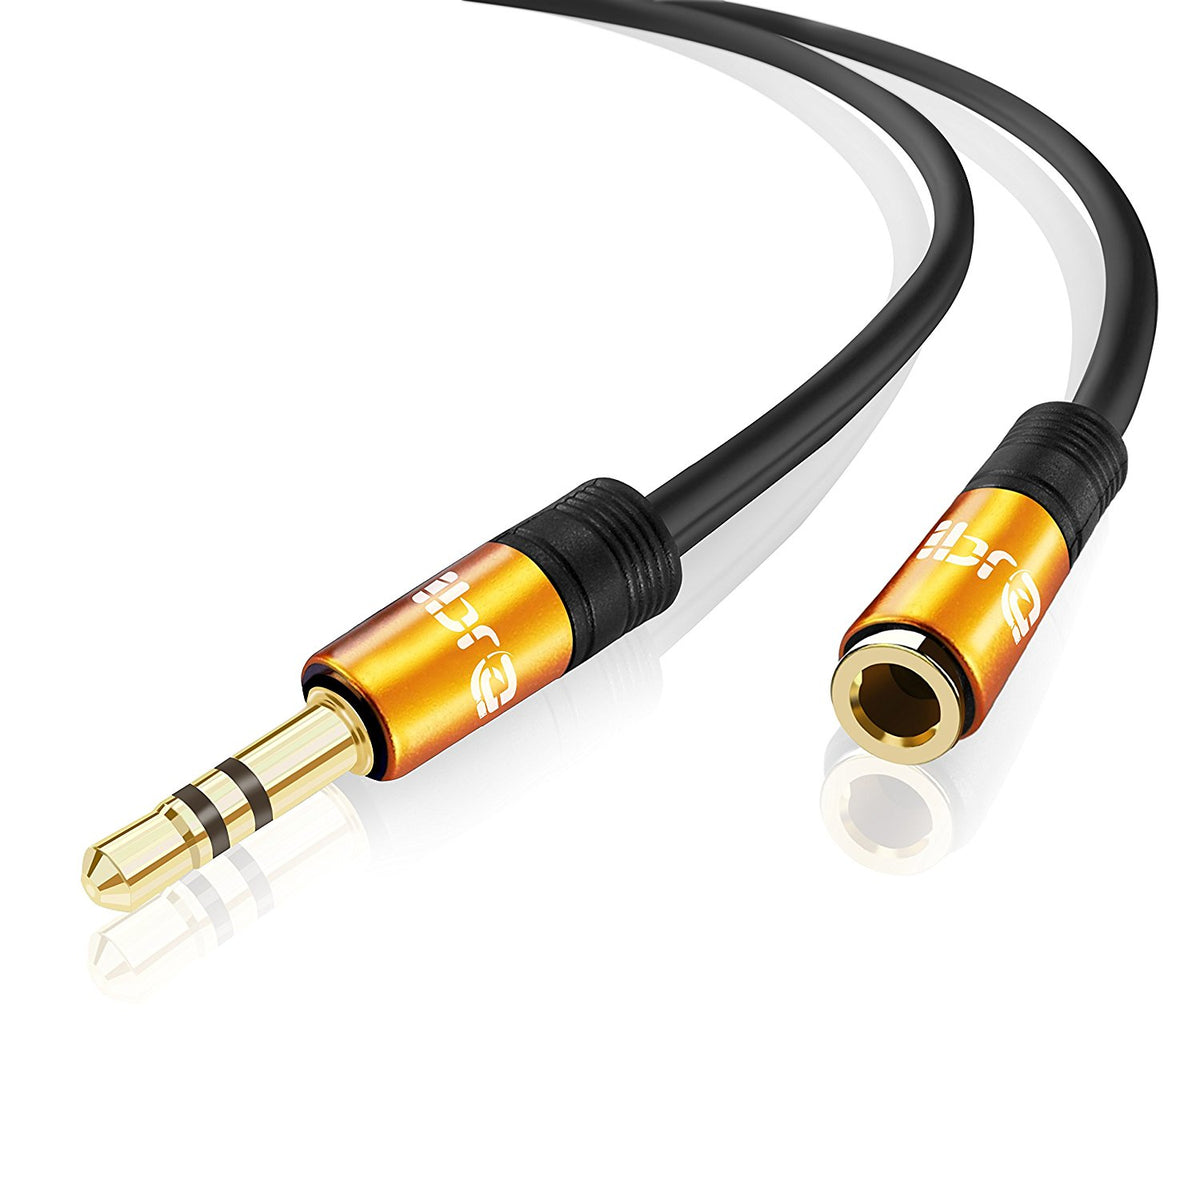 IBRA 0.5M Stereo Jack Extension Cable 3.5mm Male > 3.5mm Female - Orange